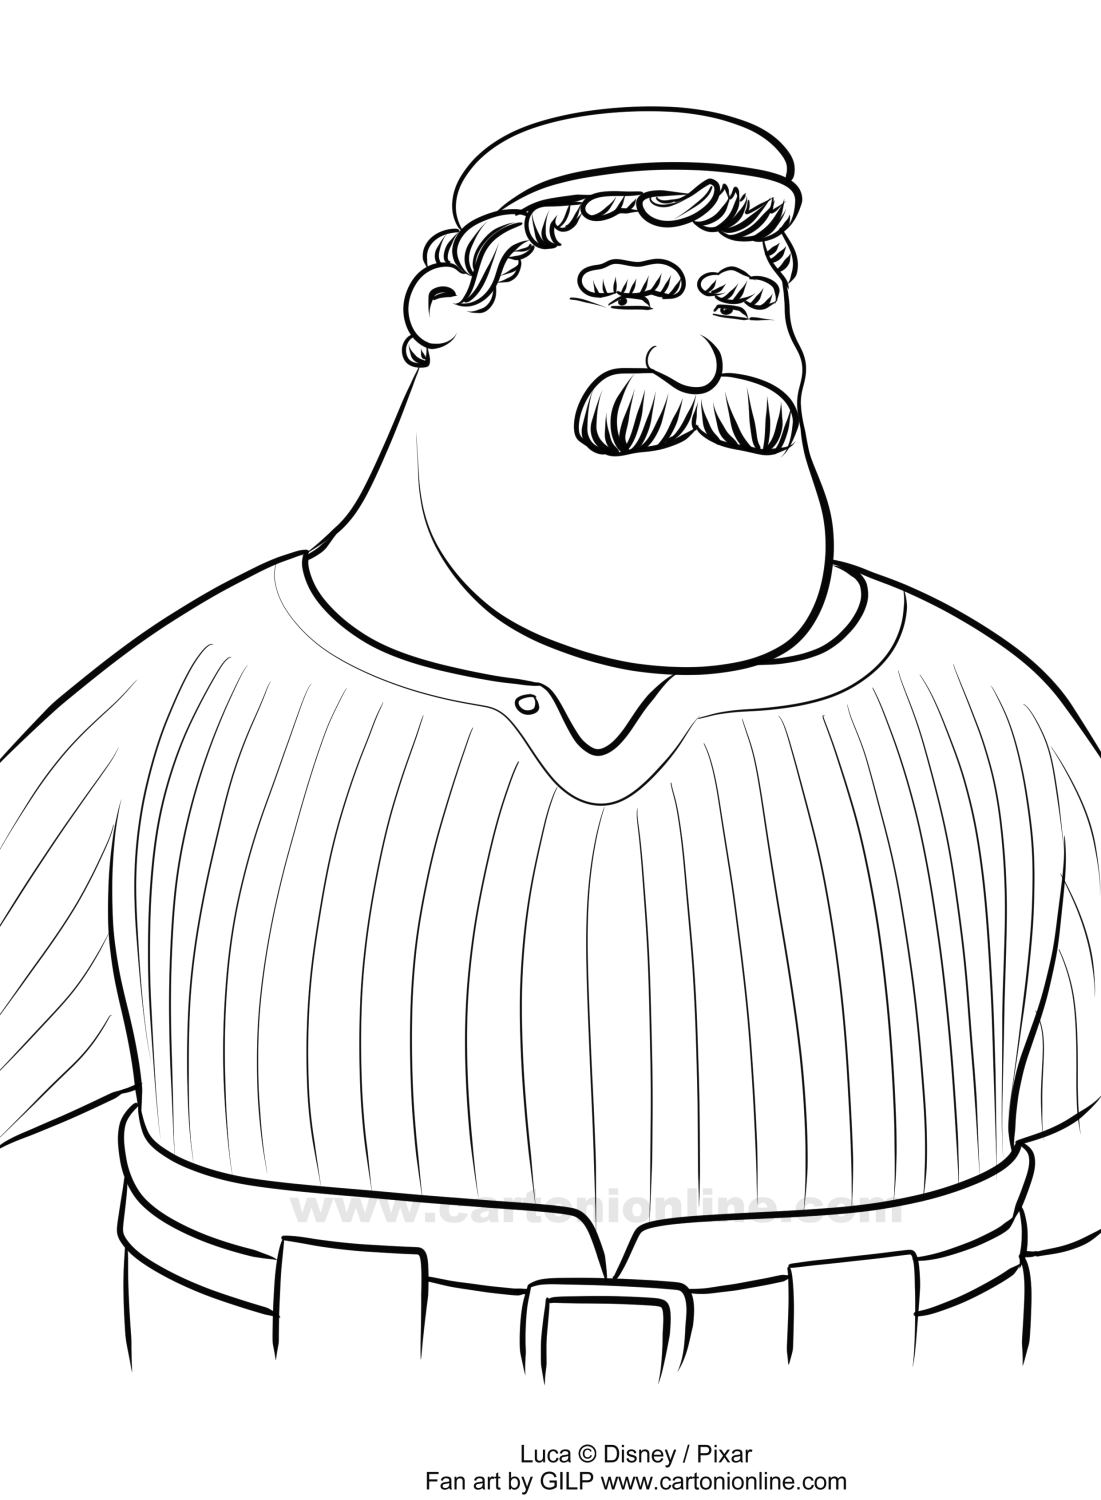 Massimo Marcovaldo Luca (Disney/Pixar) coloring page to print and coloring